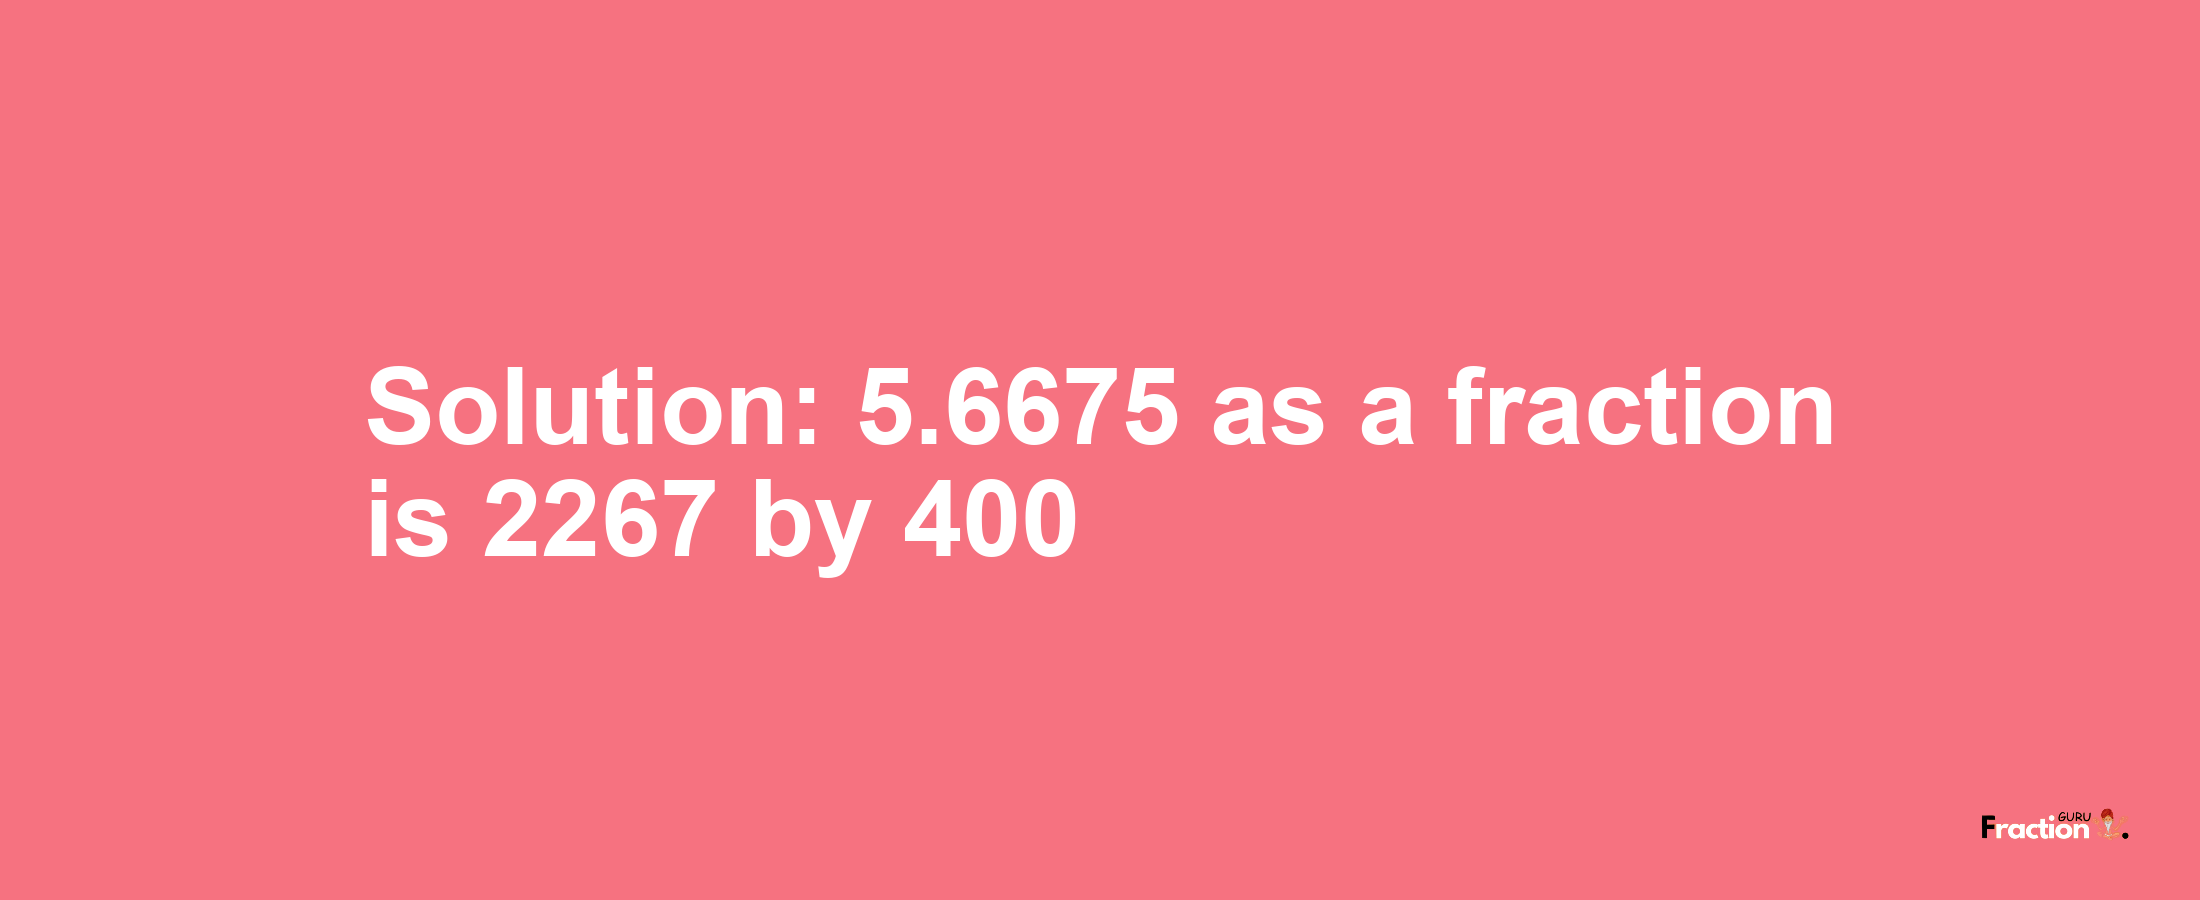 Solution:5.6675 as a fraction is 2267/400